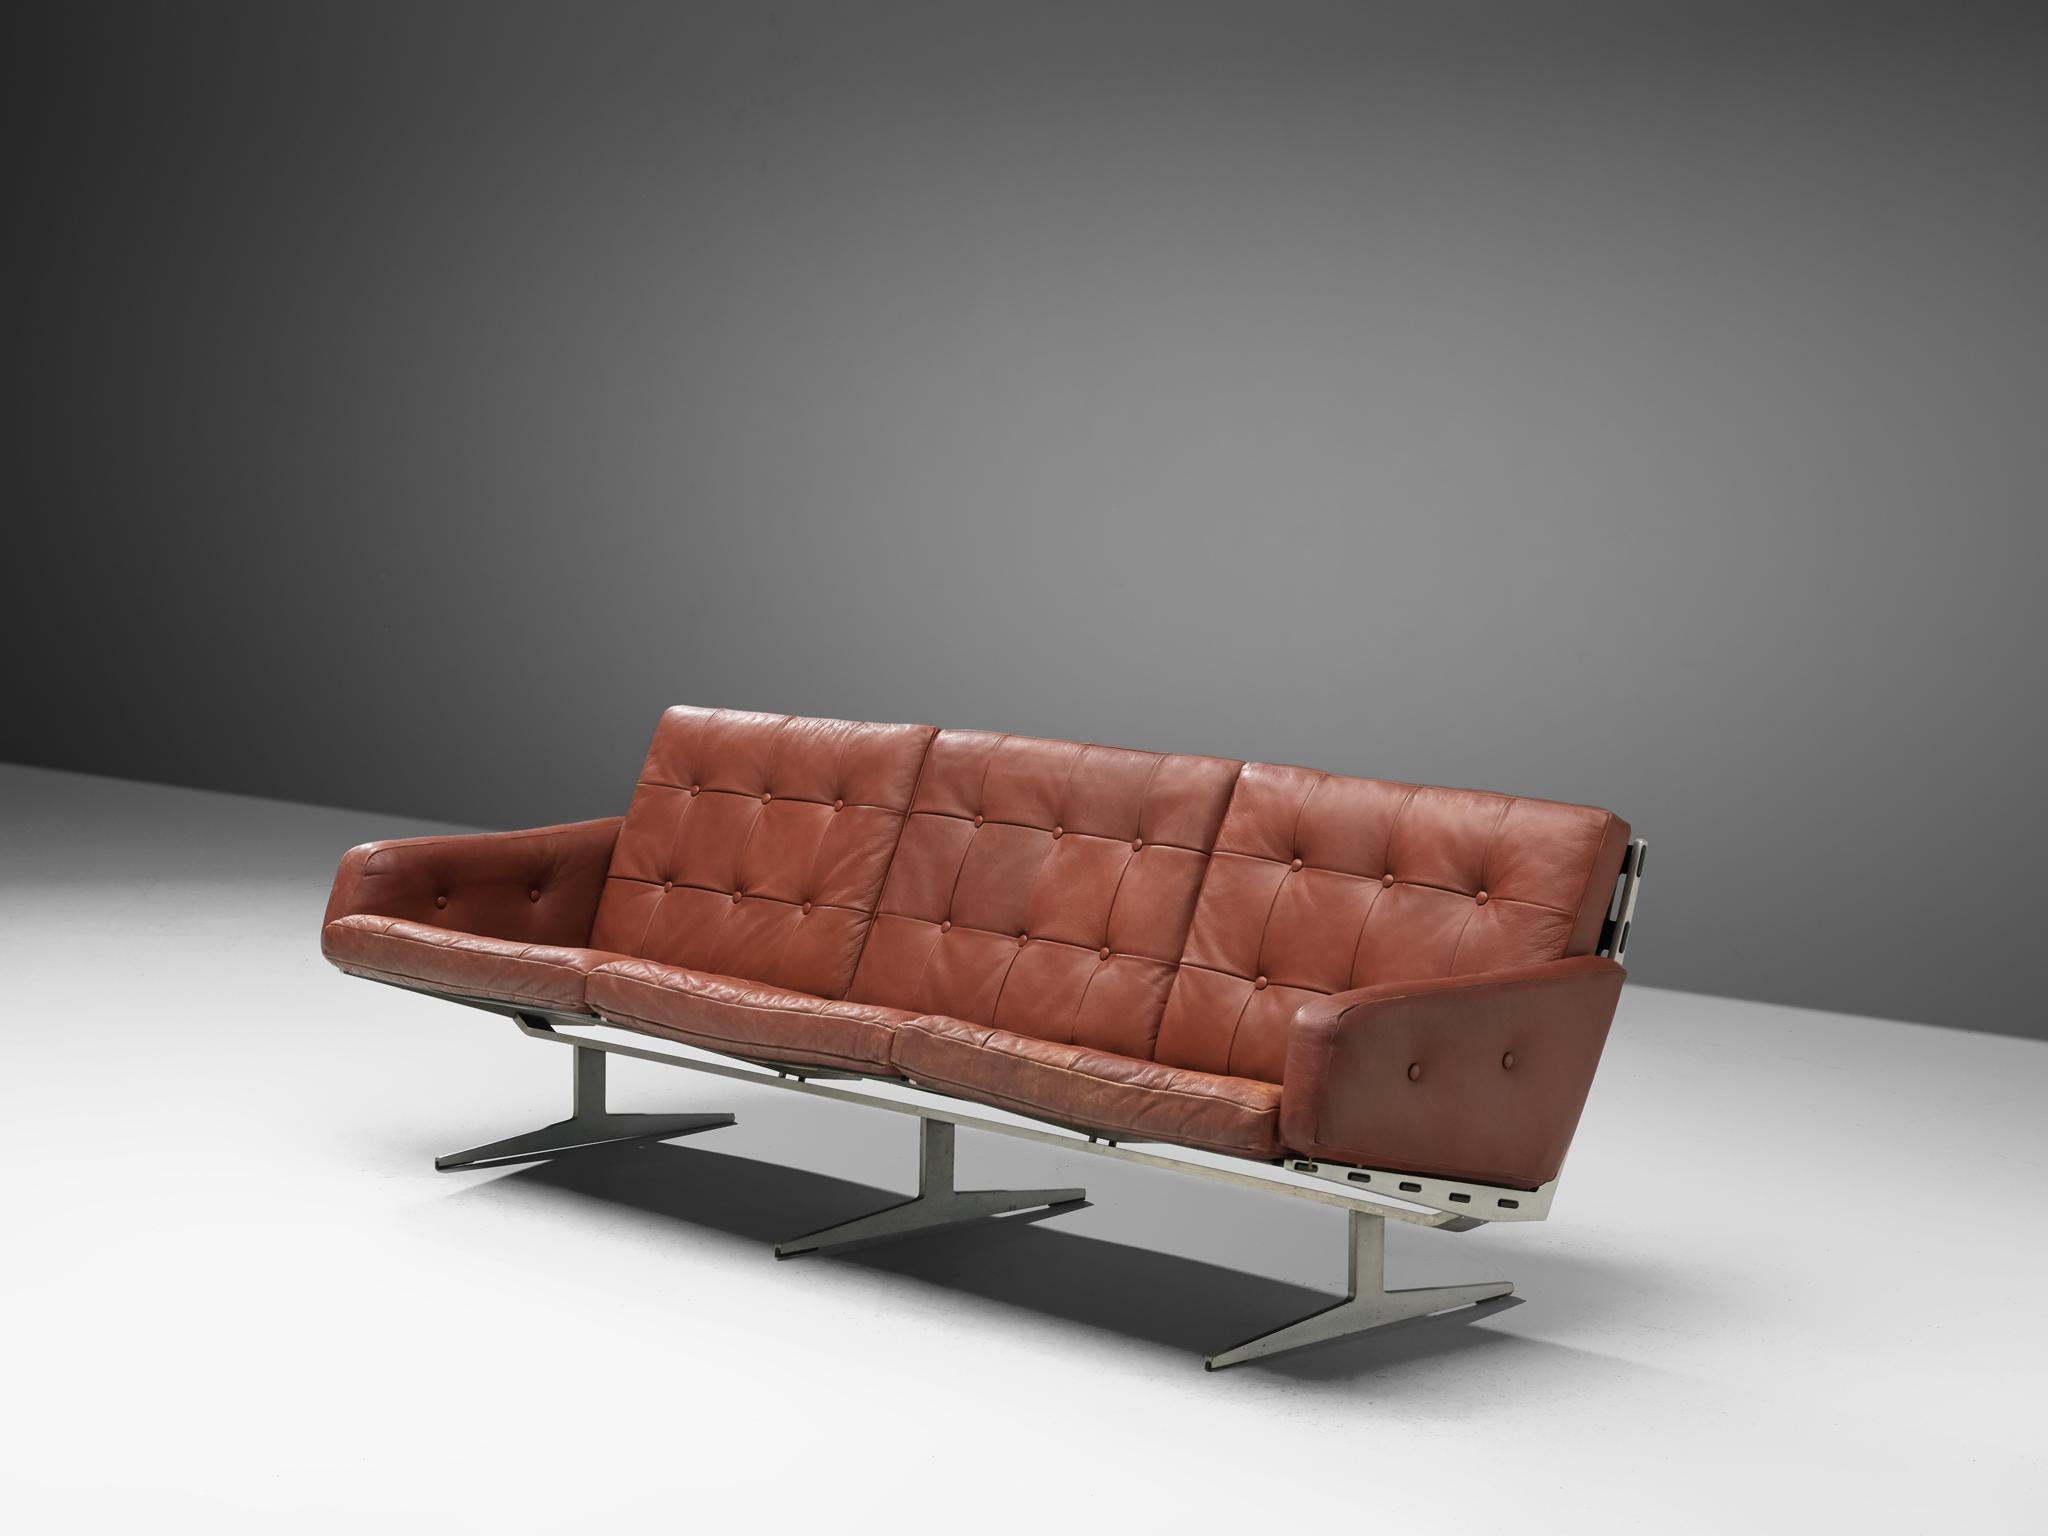 Sofa, steel and leather, Denmark, 1960s. 

This Danish sofa holds an L-shaped seating and this shape is repeated in the legs. A double L is mirrored to form the steel 'slipper.' The base of this sofa is characteristic and provides an open character